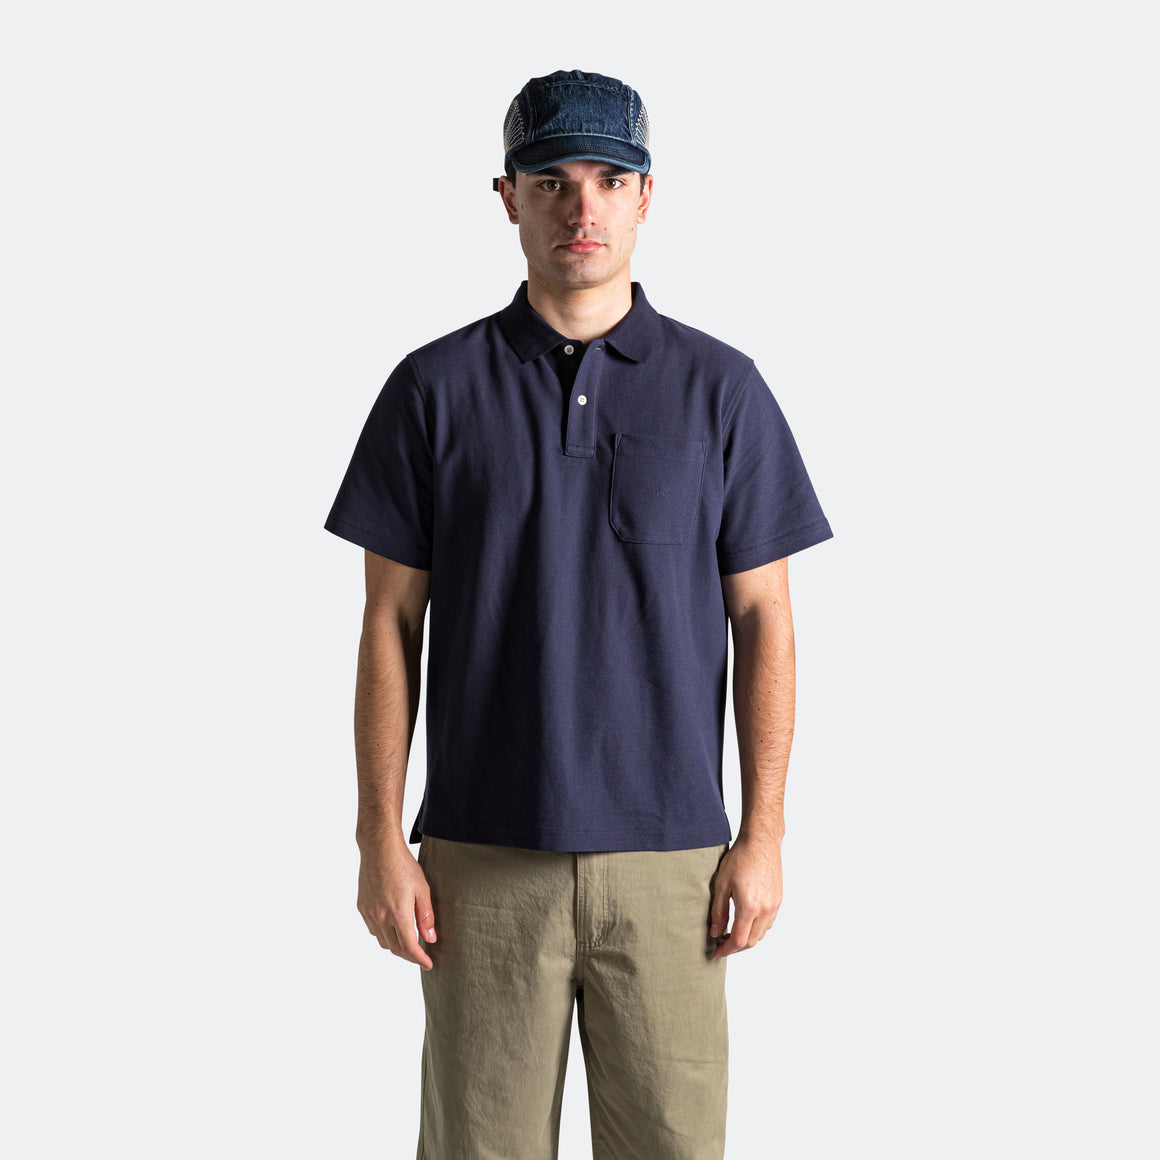 Adsum - Polo SS - Navy - UP THERE